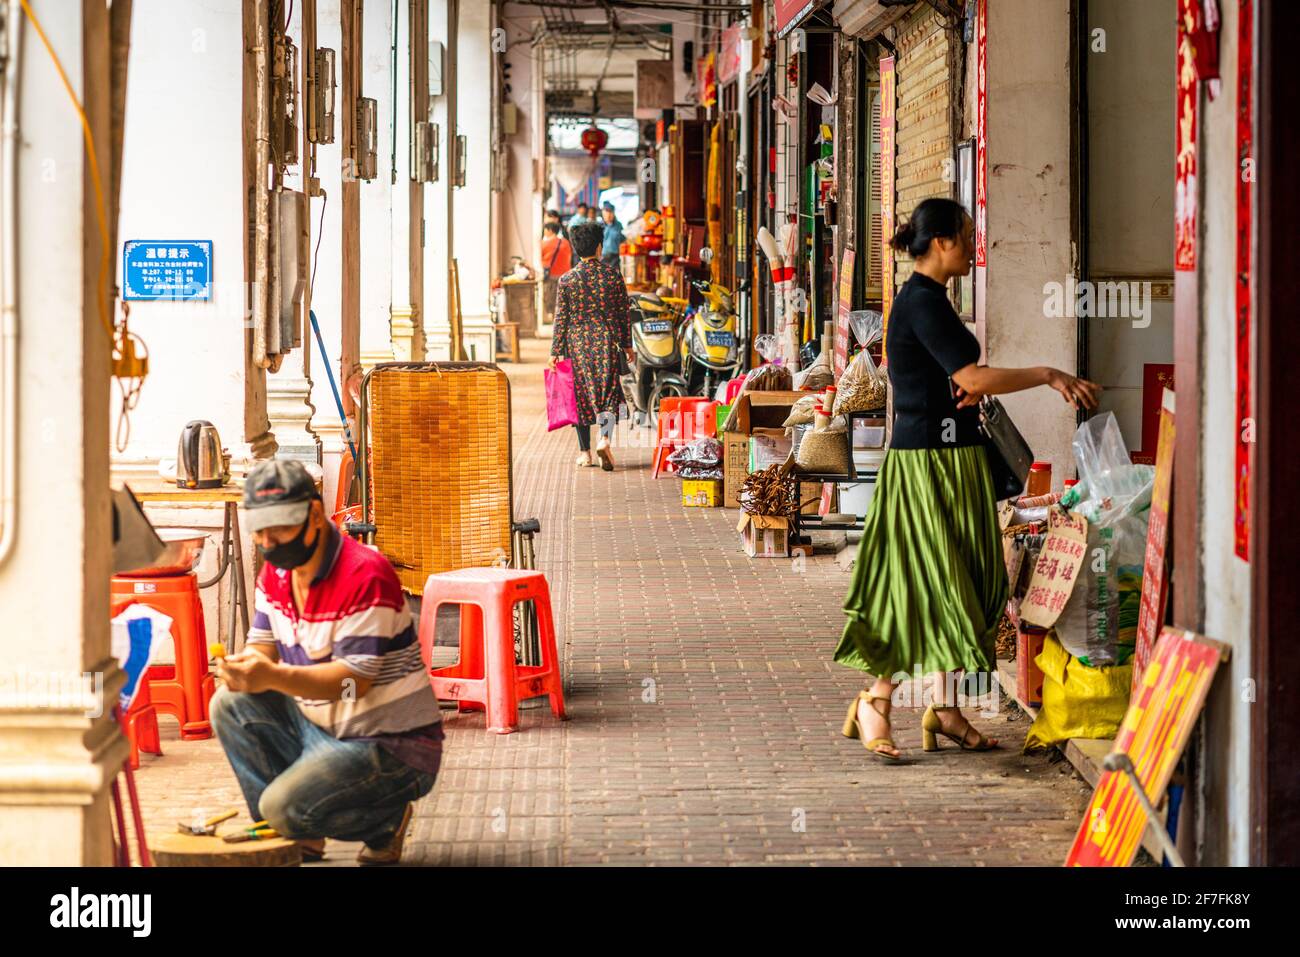 Haikou China , 21 March 2021 : Scene from everyday life under pedestrian arcade street of Qilou old town with people and shops in Haikou Hainan China Stock Photo